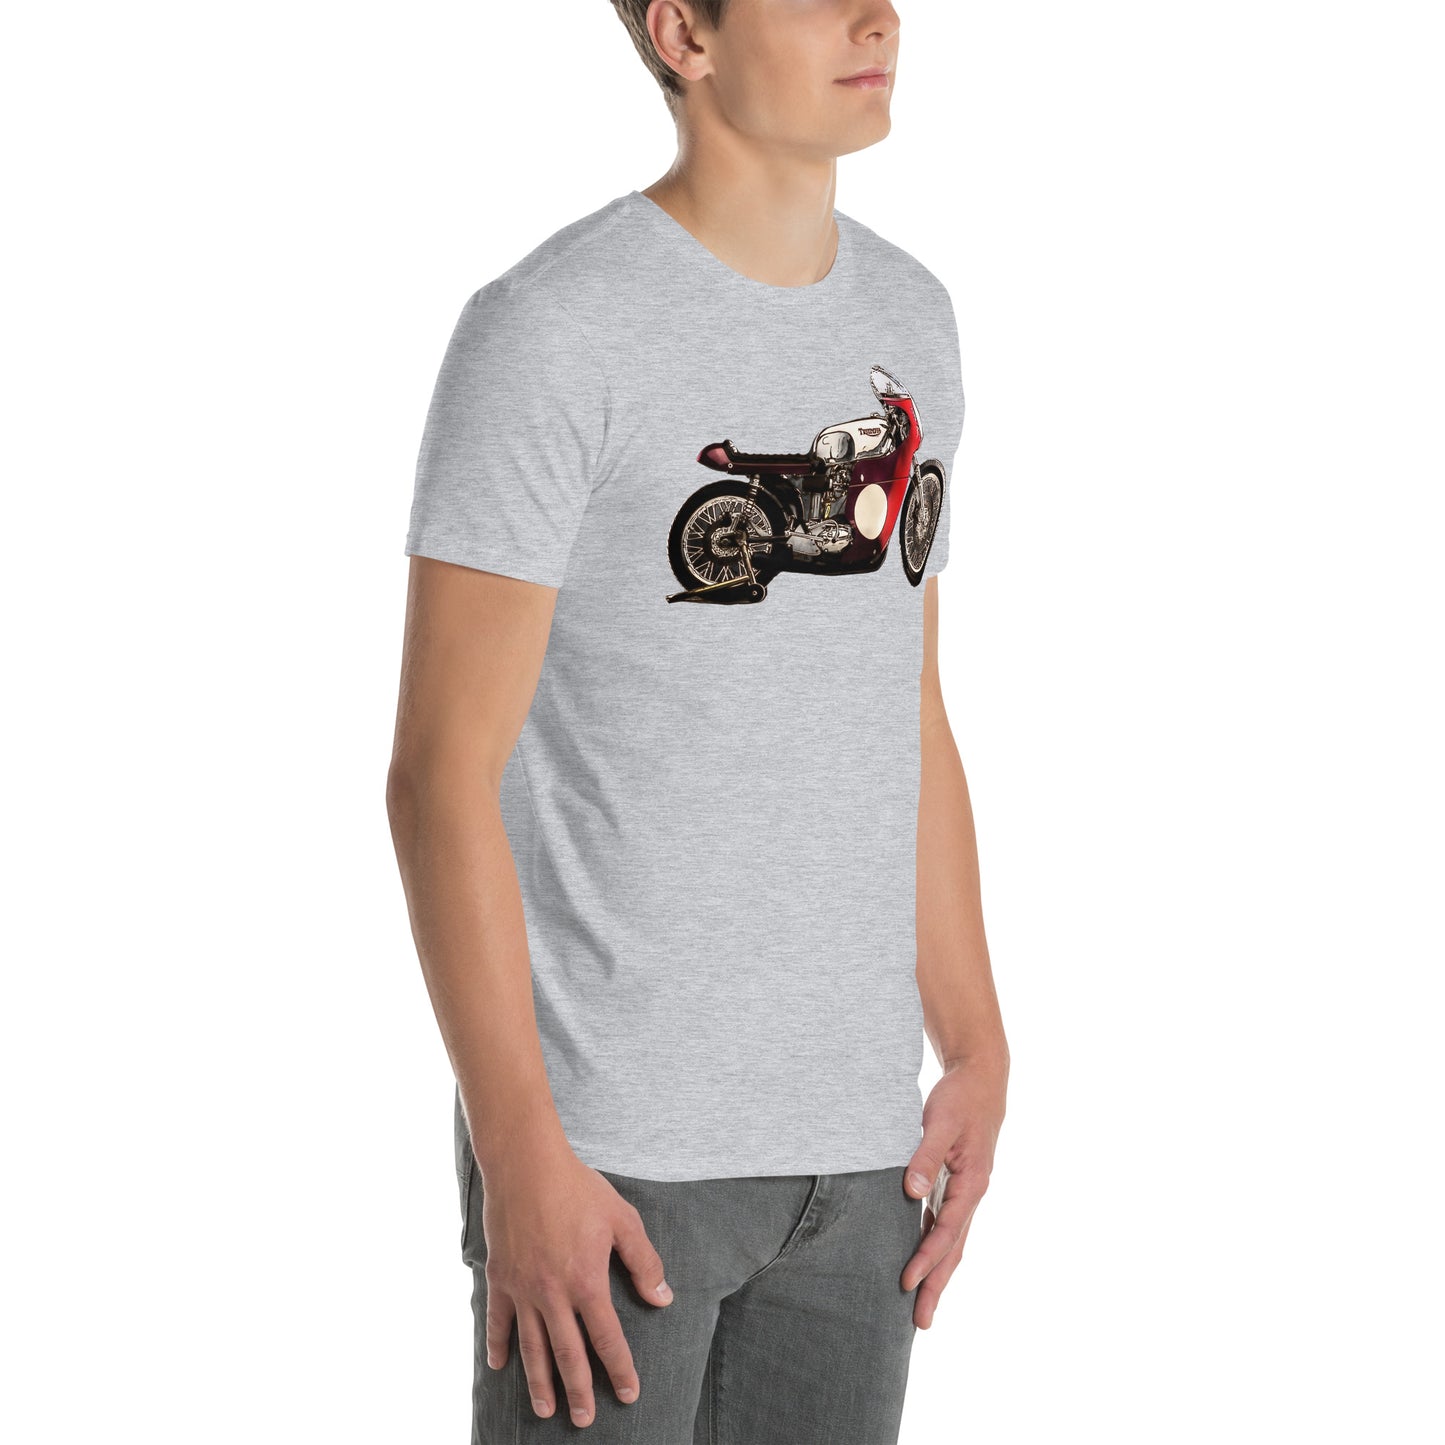 Vintage Triton Motorcycle Tee - Classic Unisex Cotton Shirt for Bike Enthusiasts